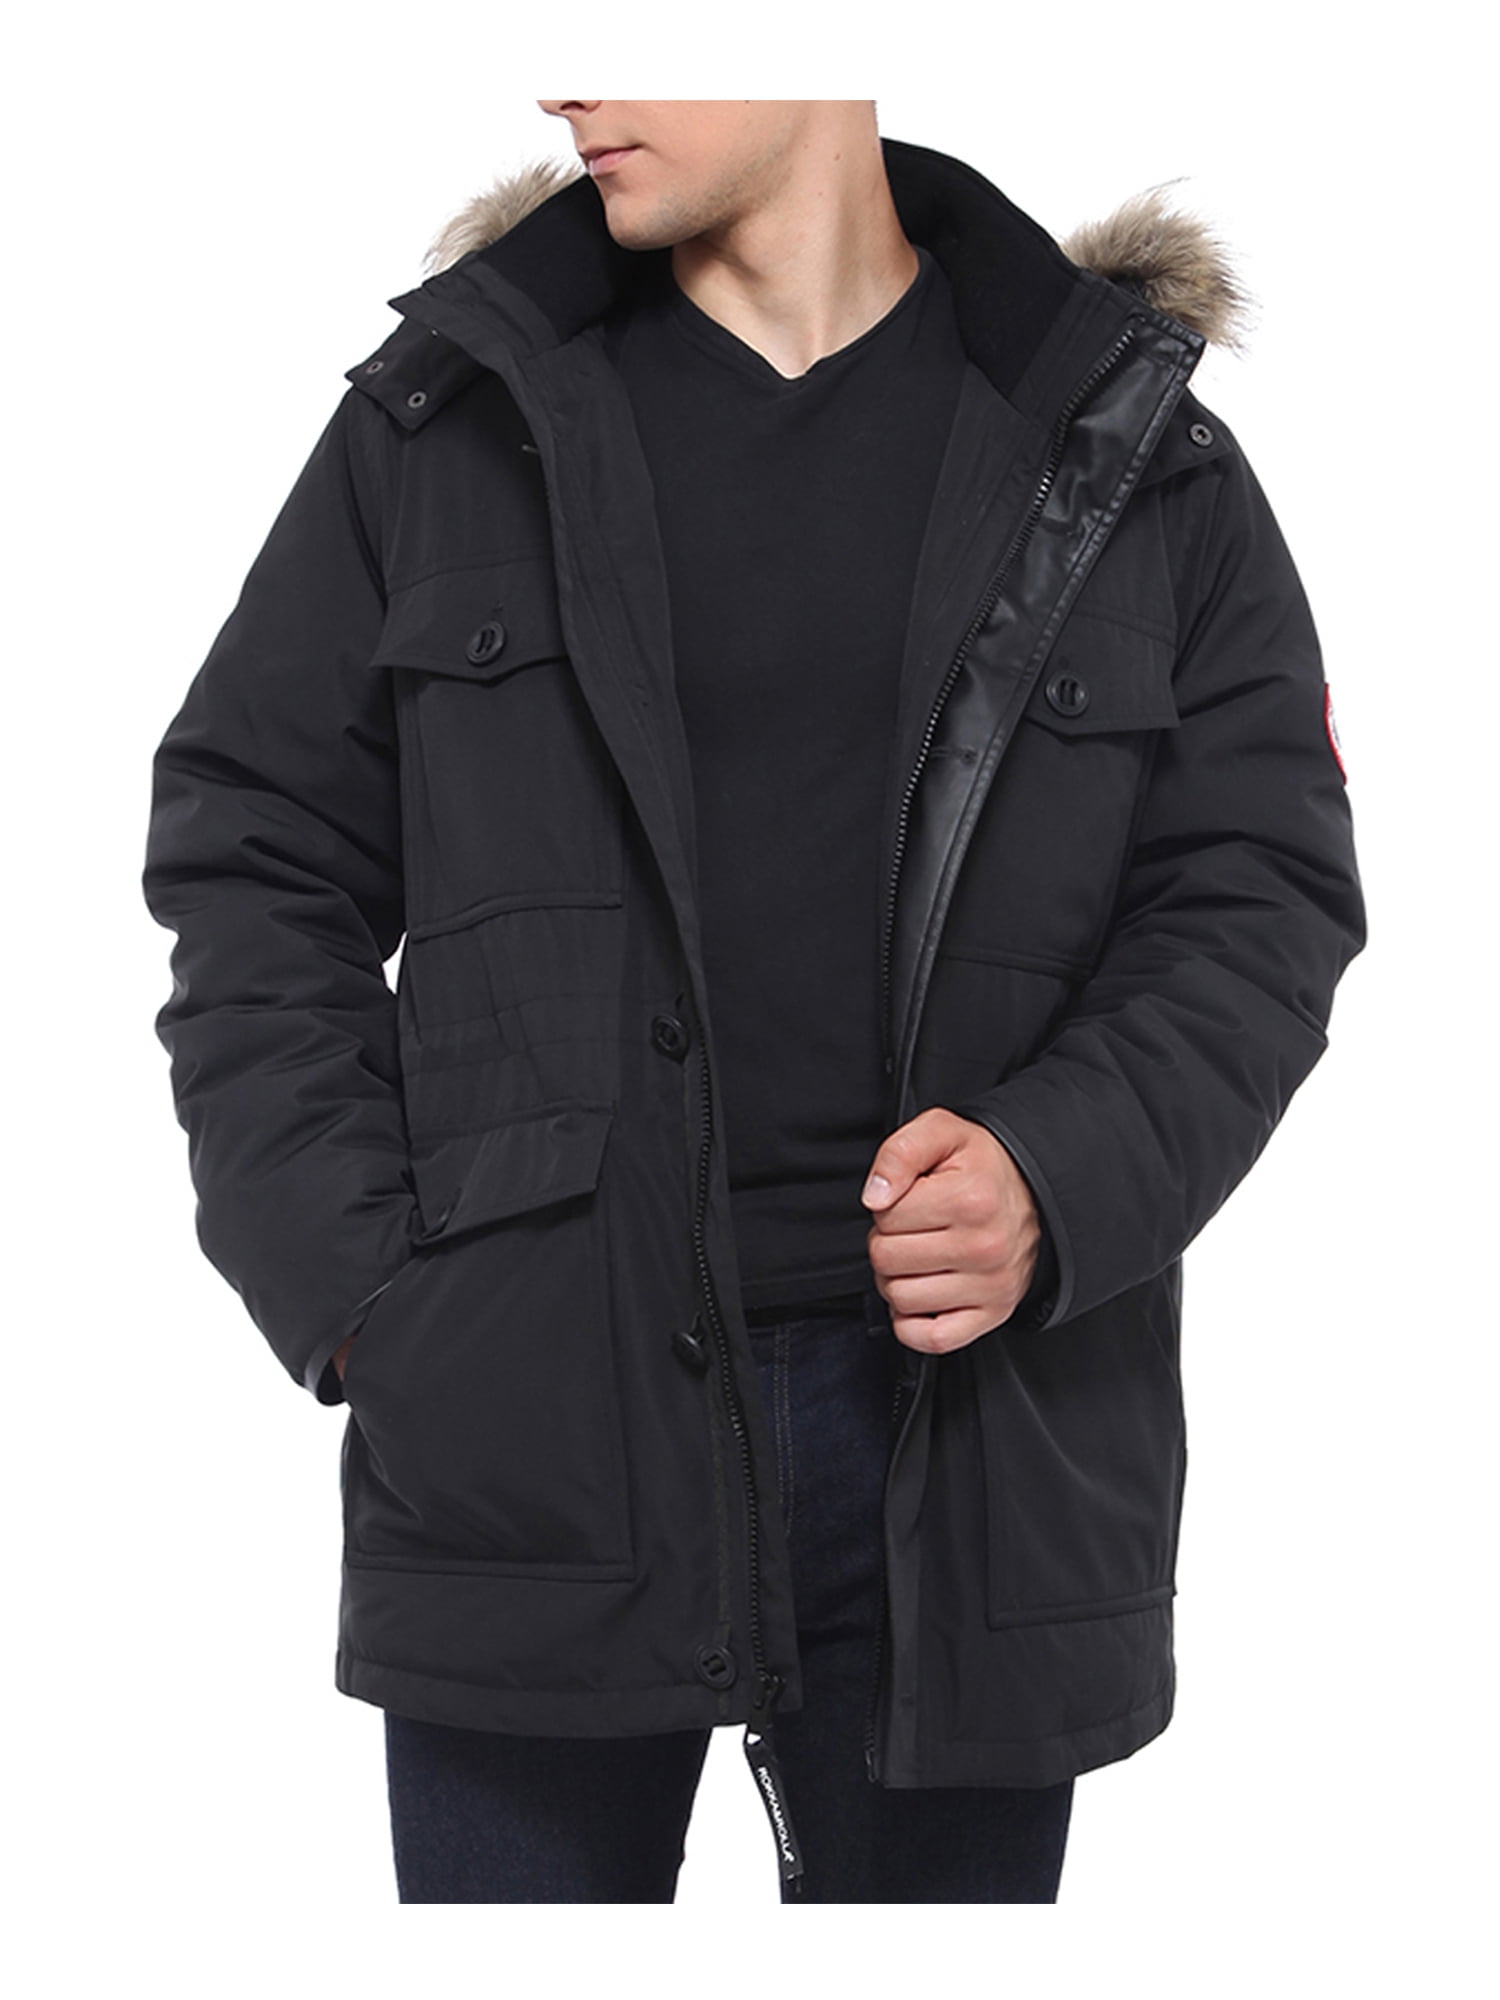 today-UK Mens Winter Thicken Warm Parka Jacket with Removable Hood